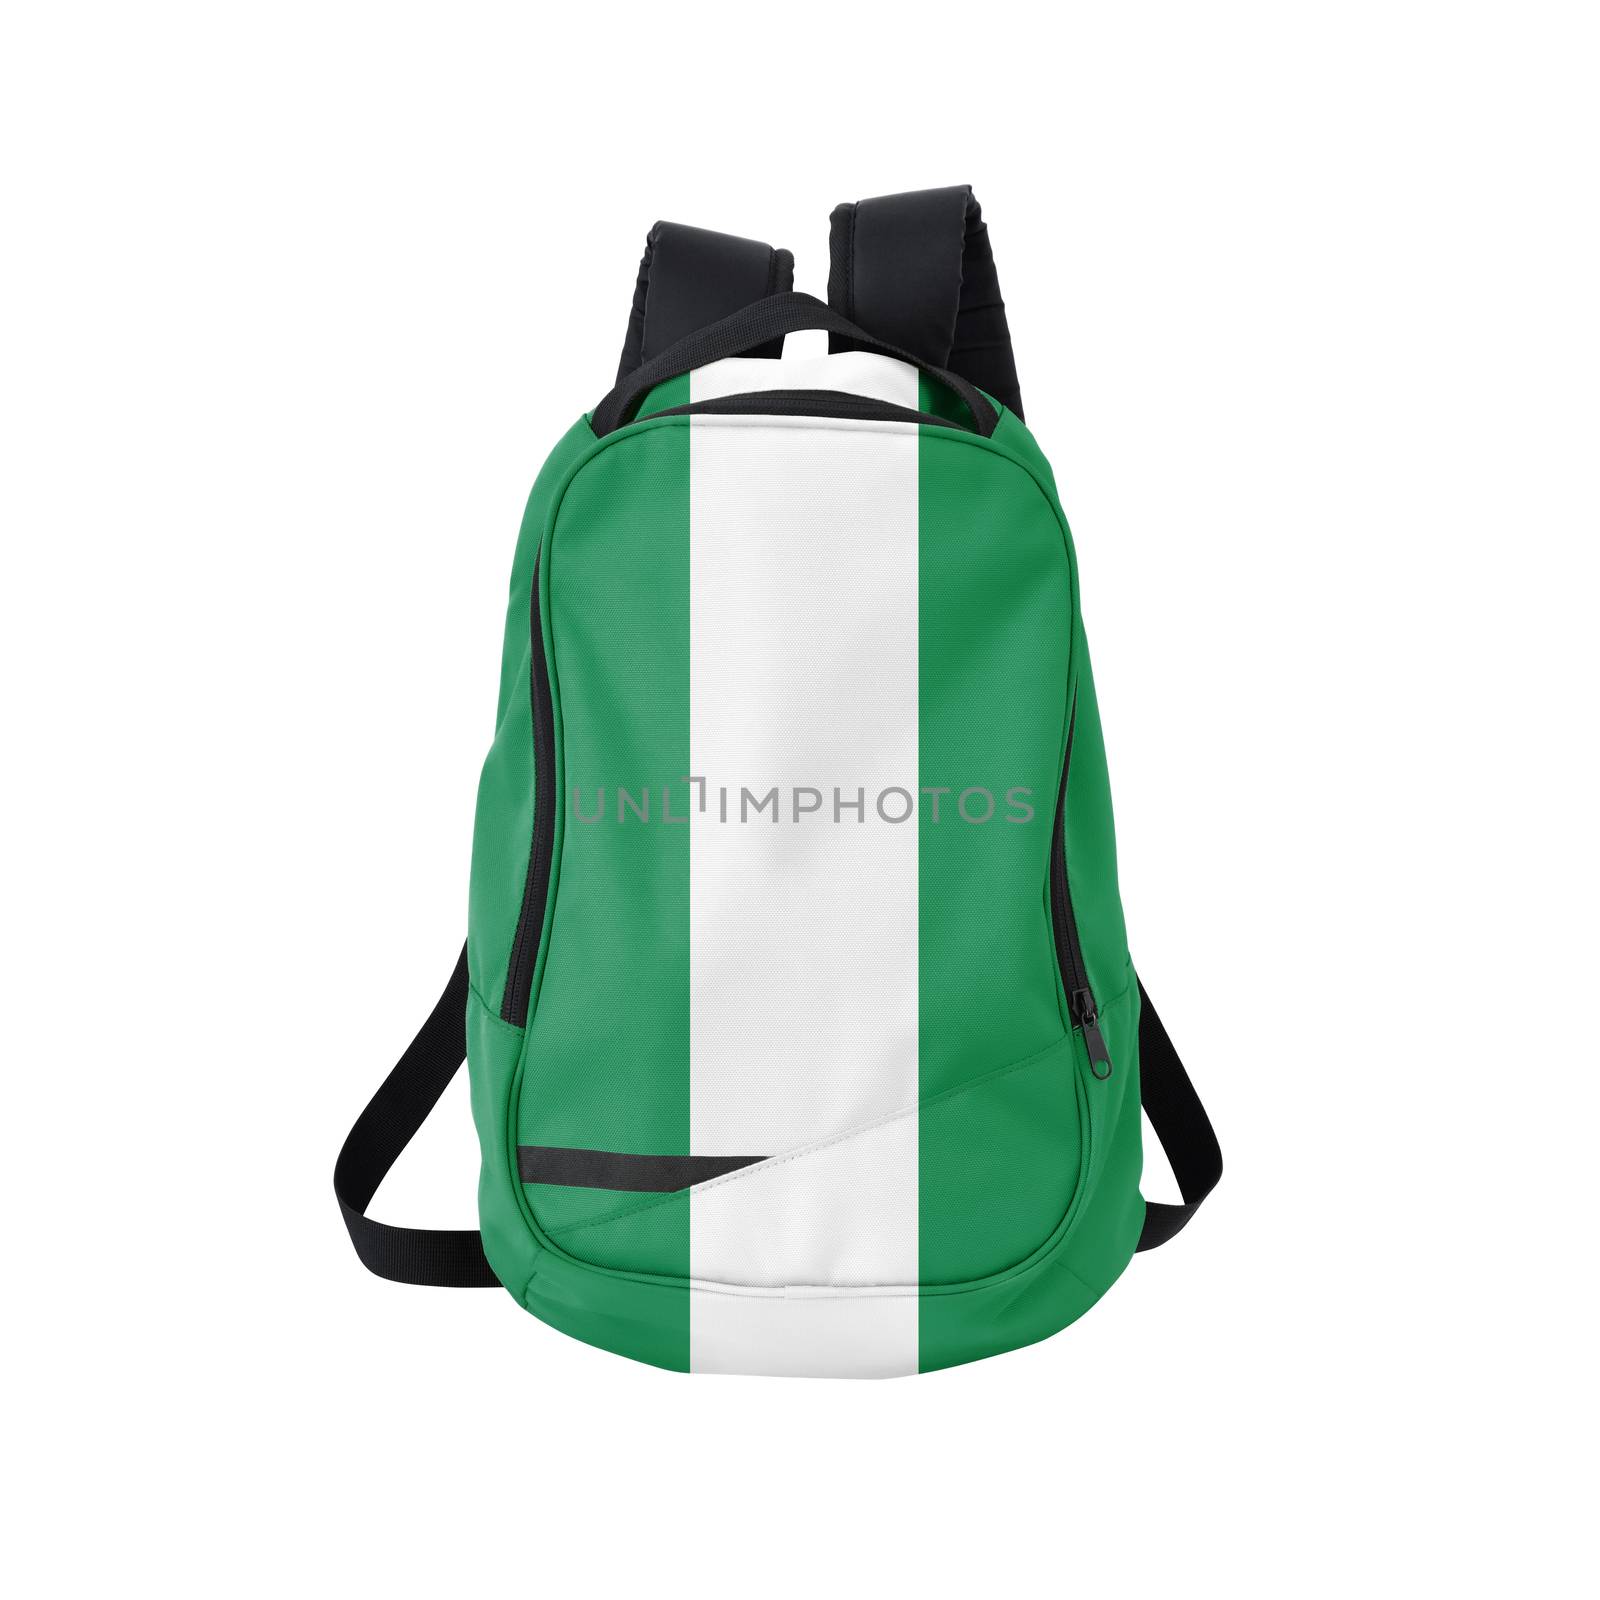 Nigeria flag backpack isolated on white background. Back to school concept. Education and study abroad. Travel and tourism in Nigeria